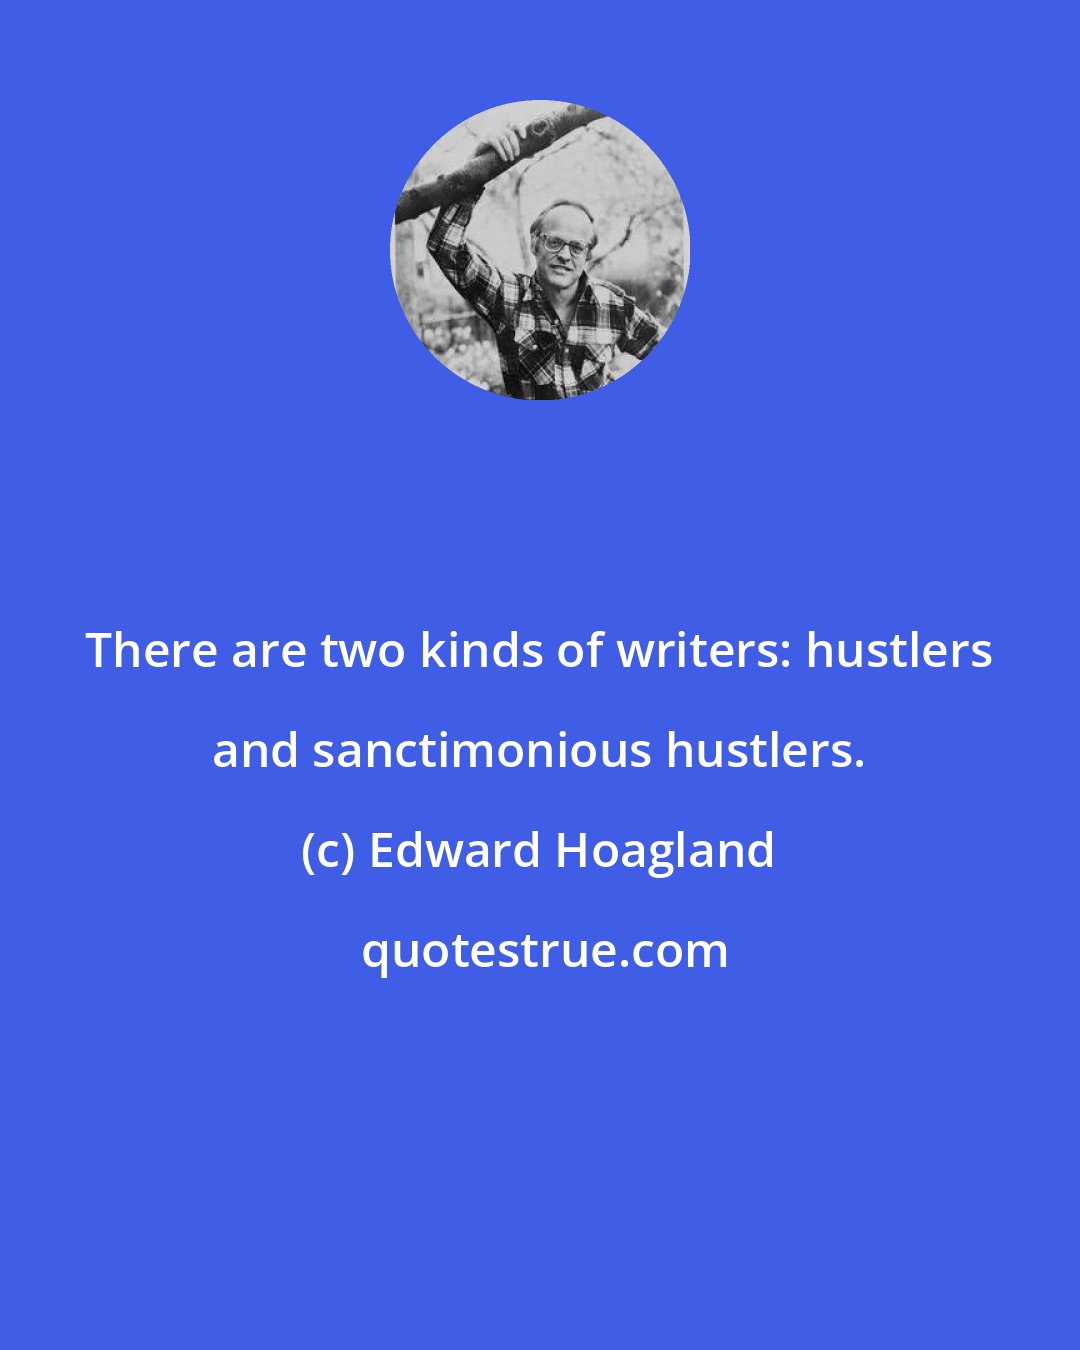 Edward Hoagland: There are two kinds of writers: hustlers and sanctimonious hustlers.